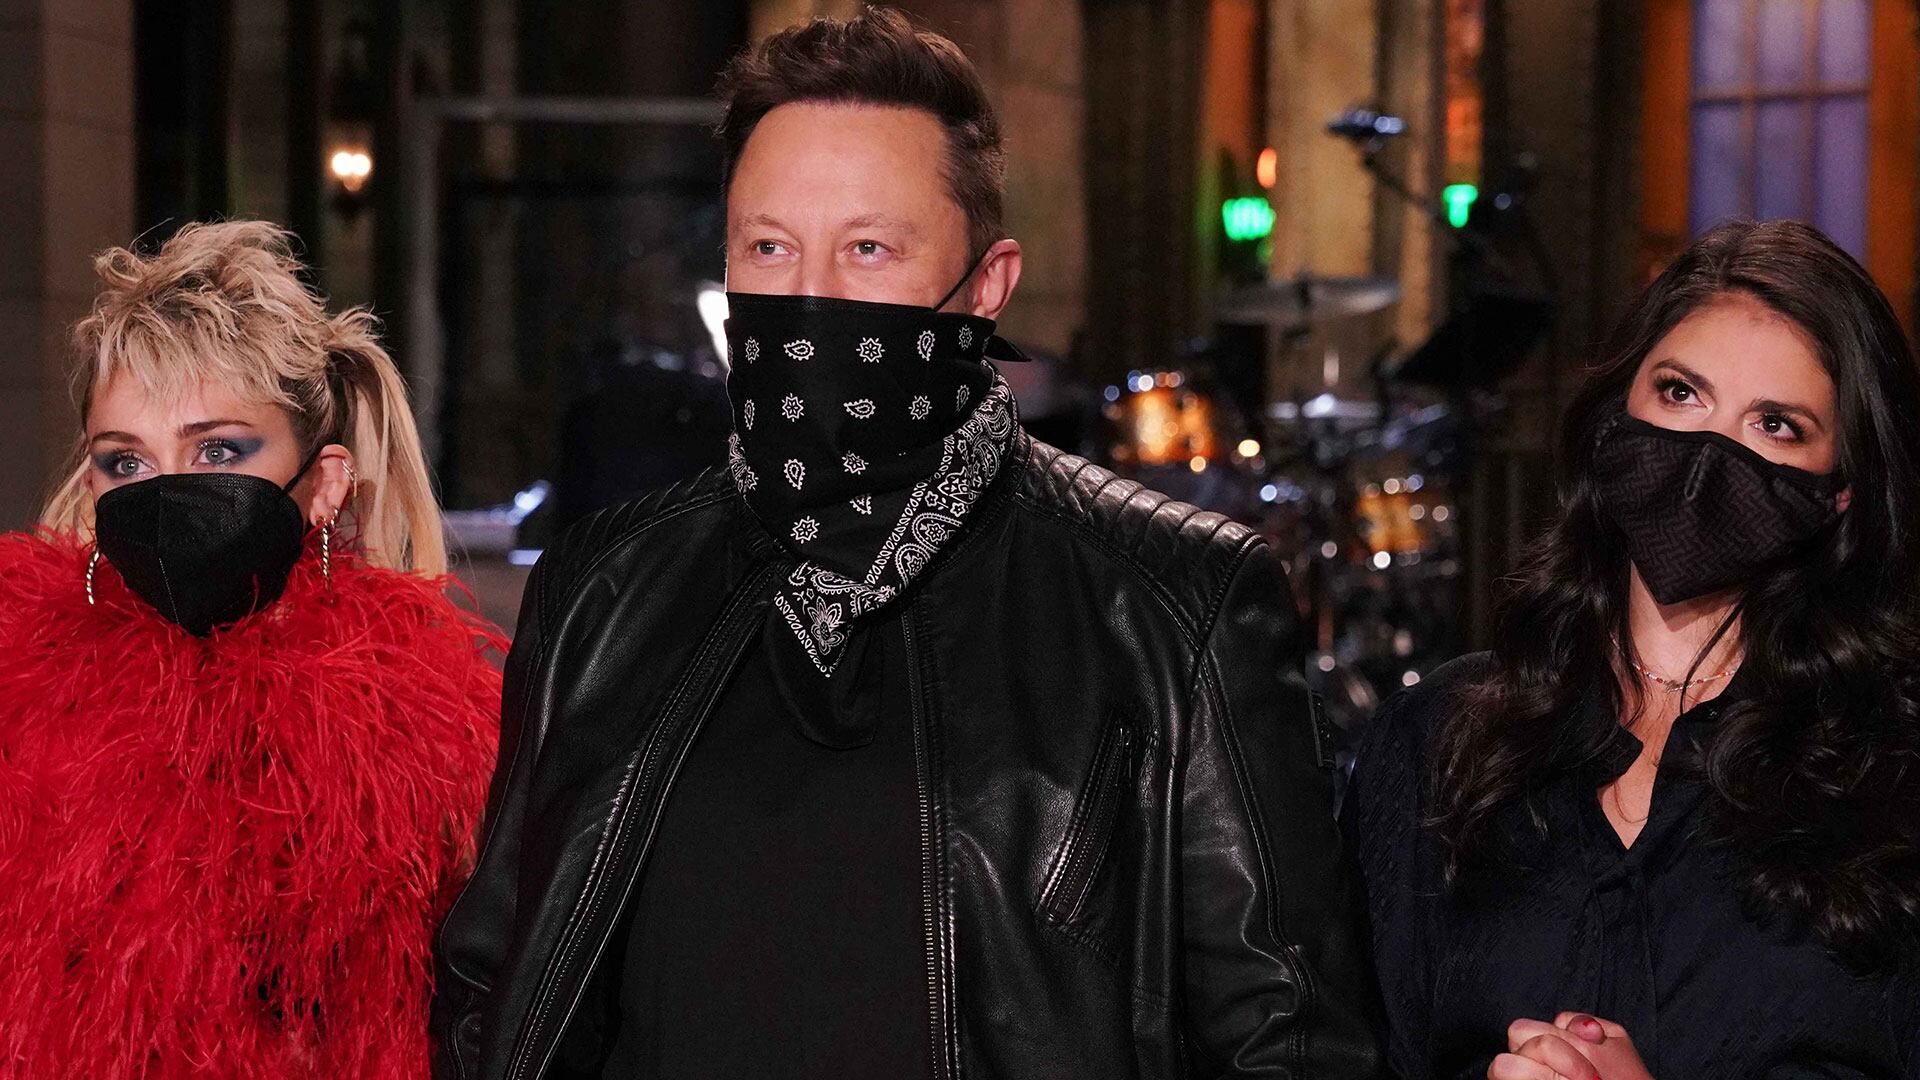 How To Watch Elon Musk On Snl Stream Saturday Night Live Clips And Replay Online From Anywhere 